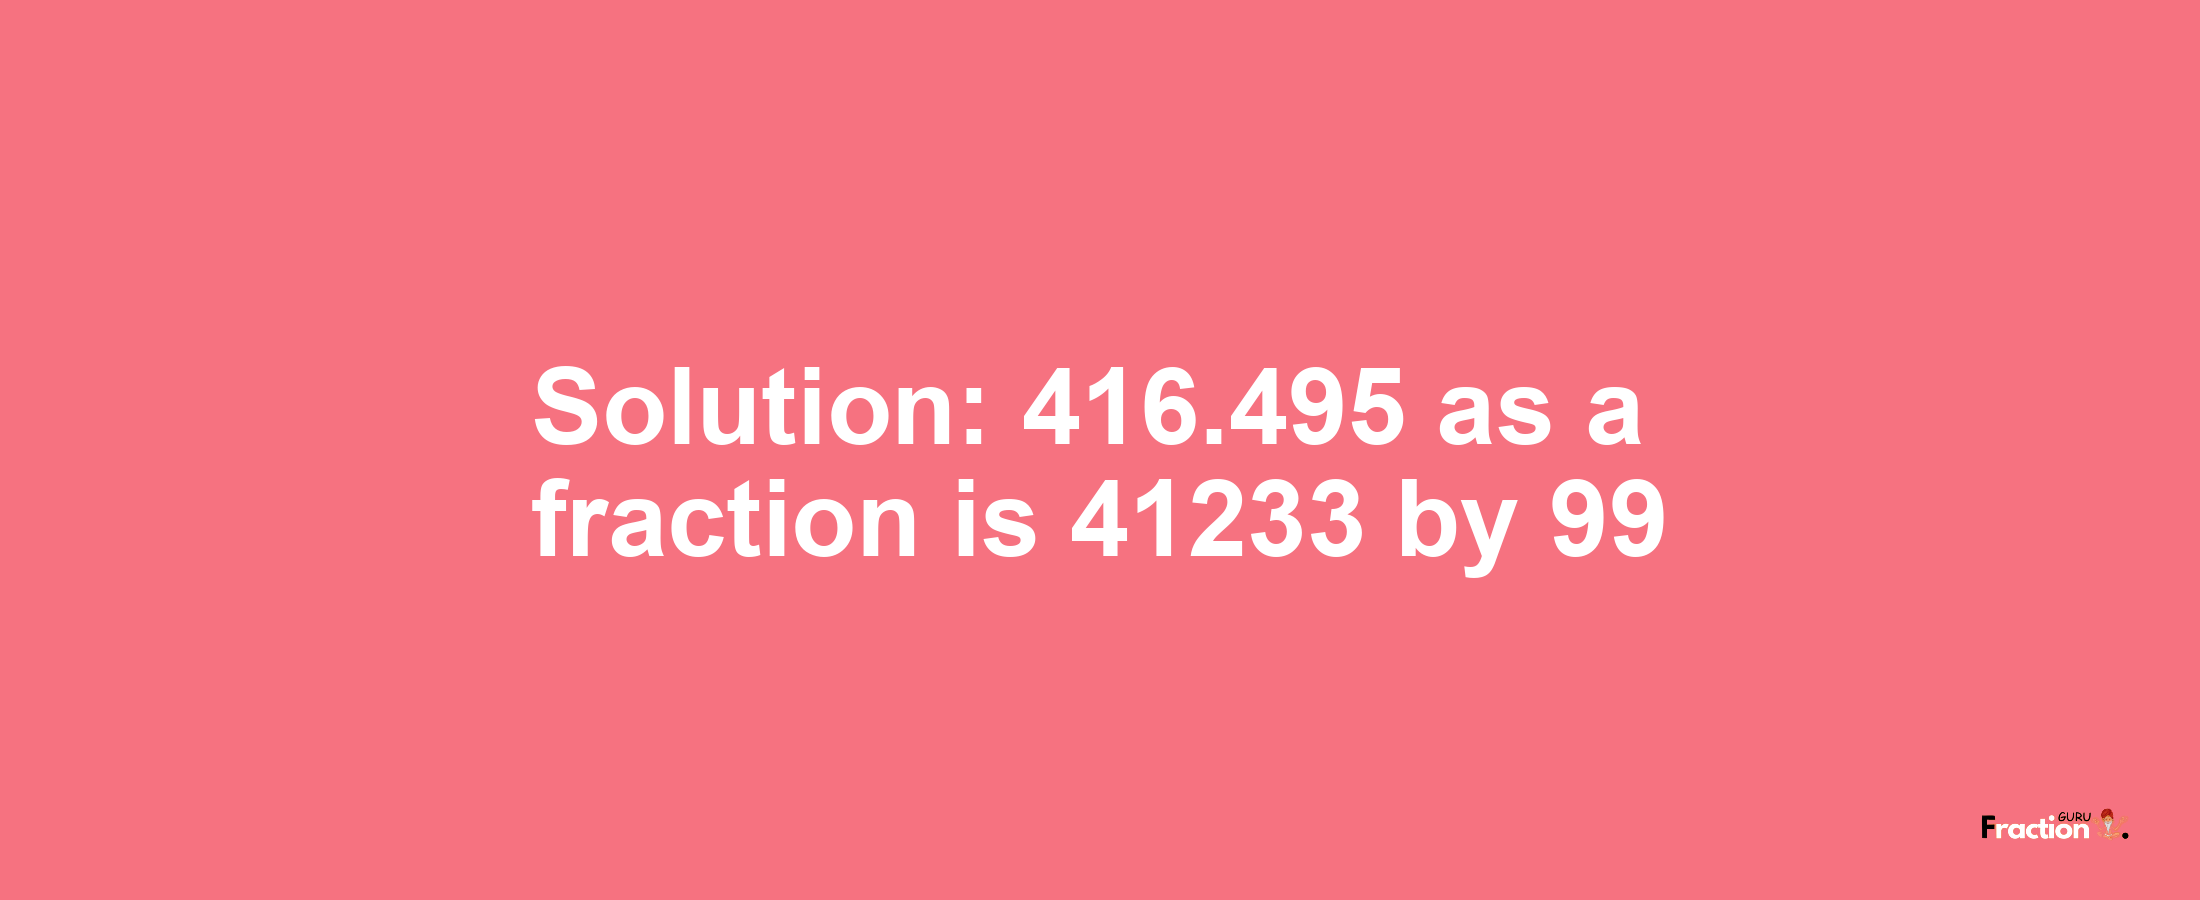 Solution:416.495 as a fraction is 41233/99